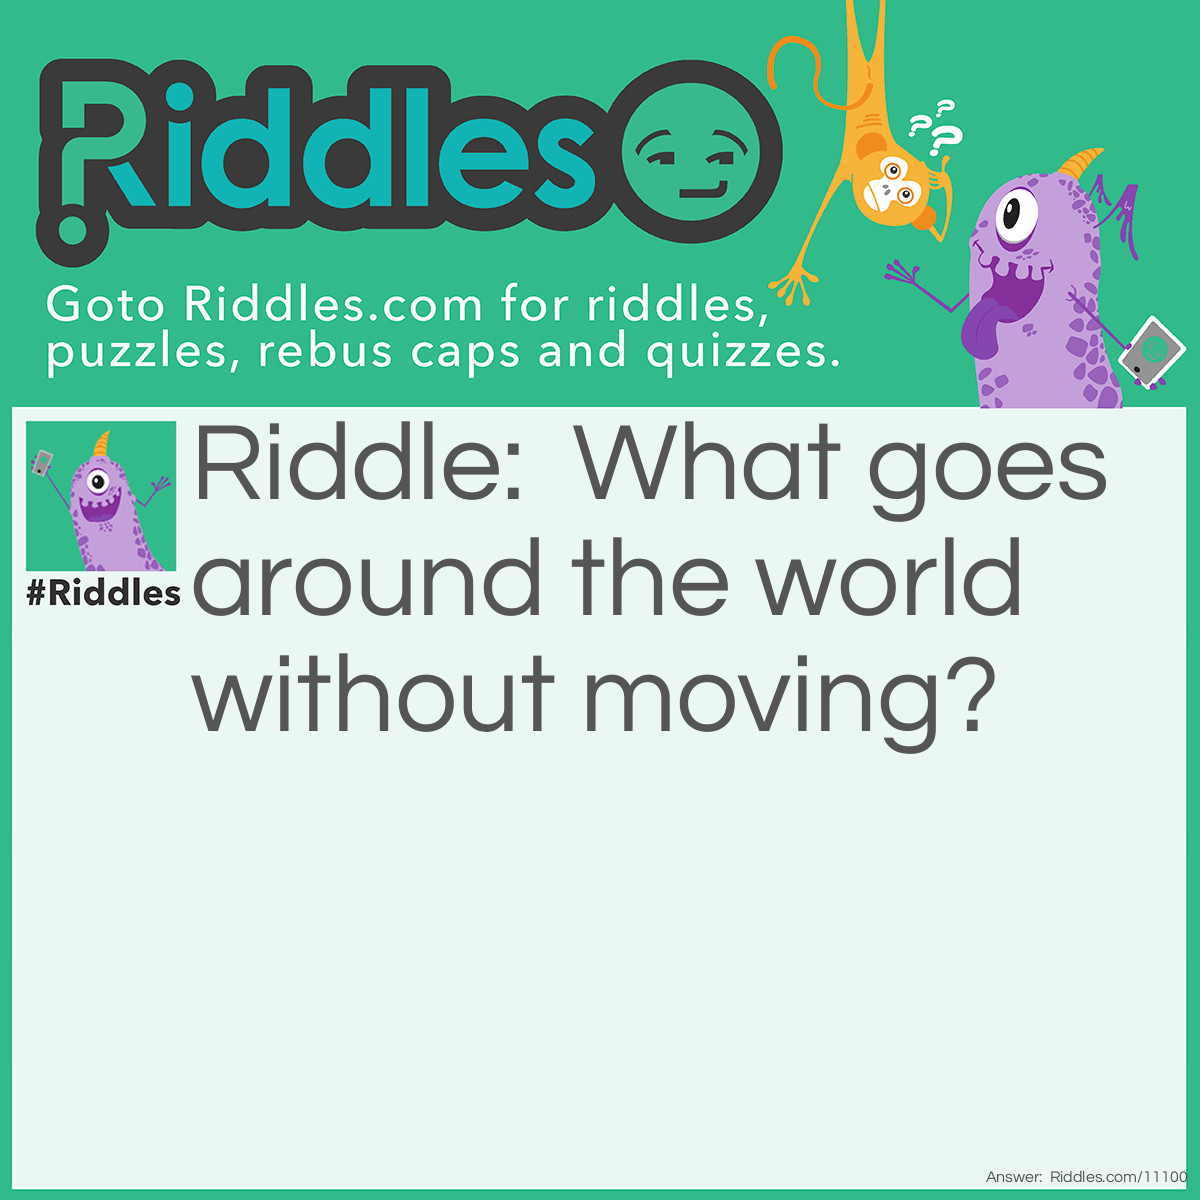 Riddle: What goes around the world without moving? Answer: Road.